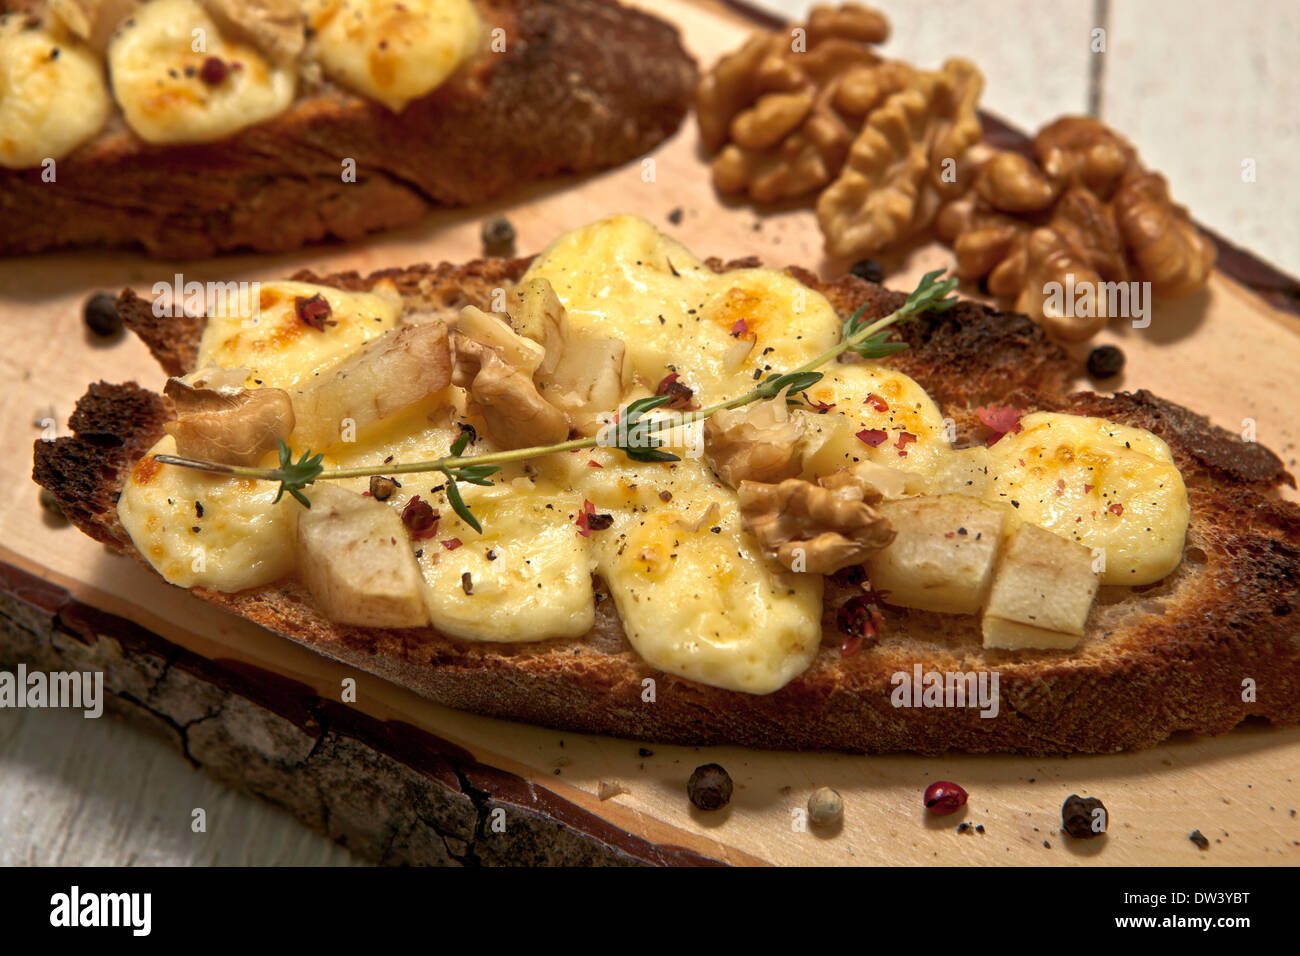 French bread with brie and pears Stock Photo